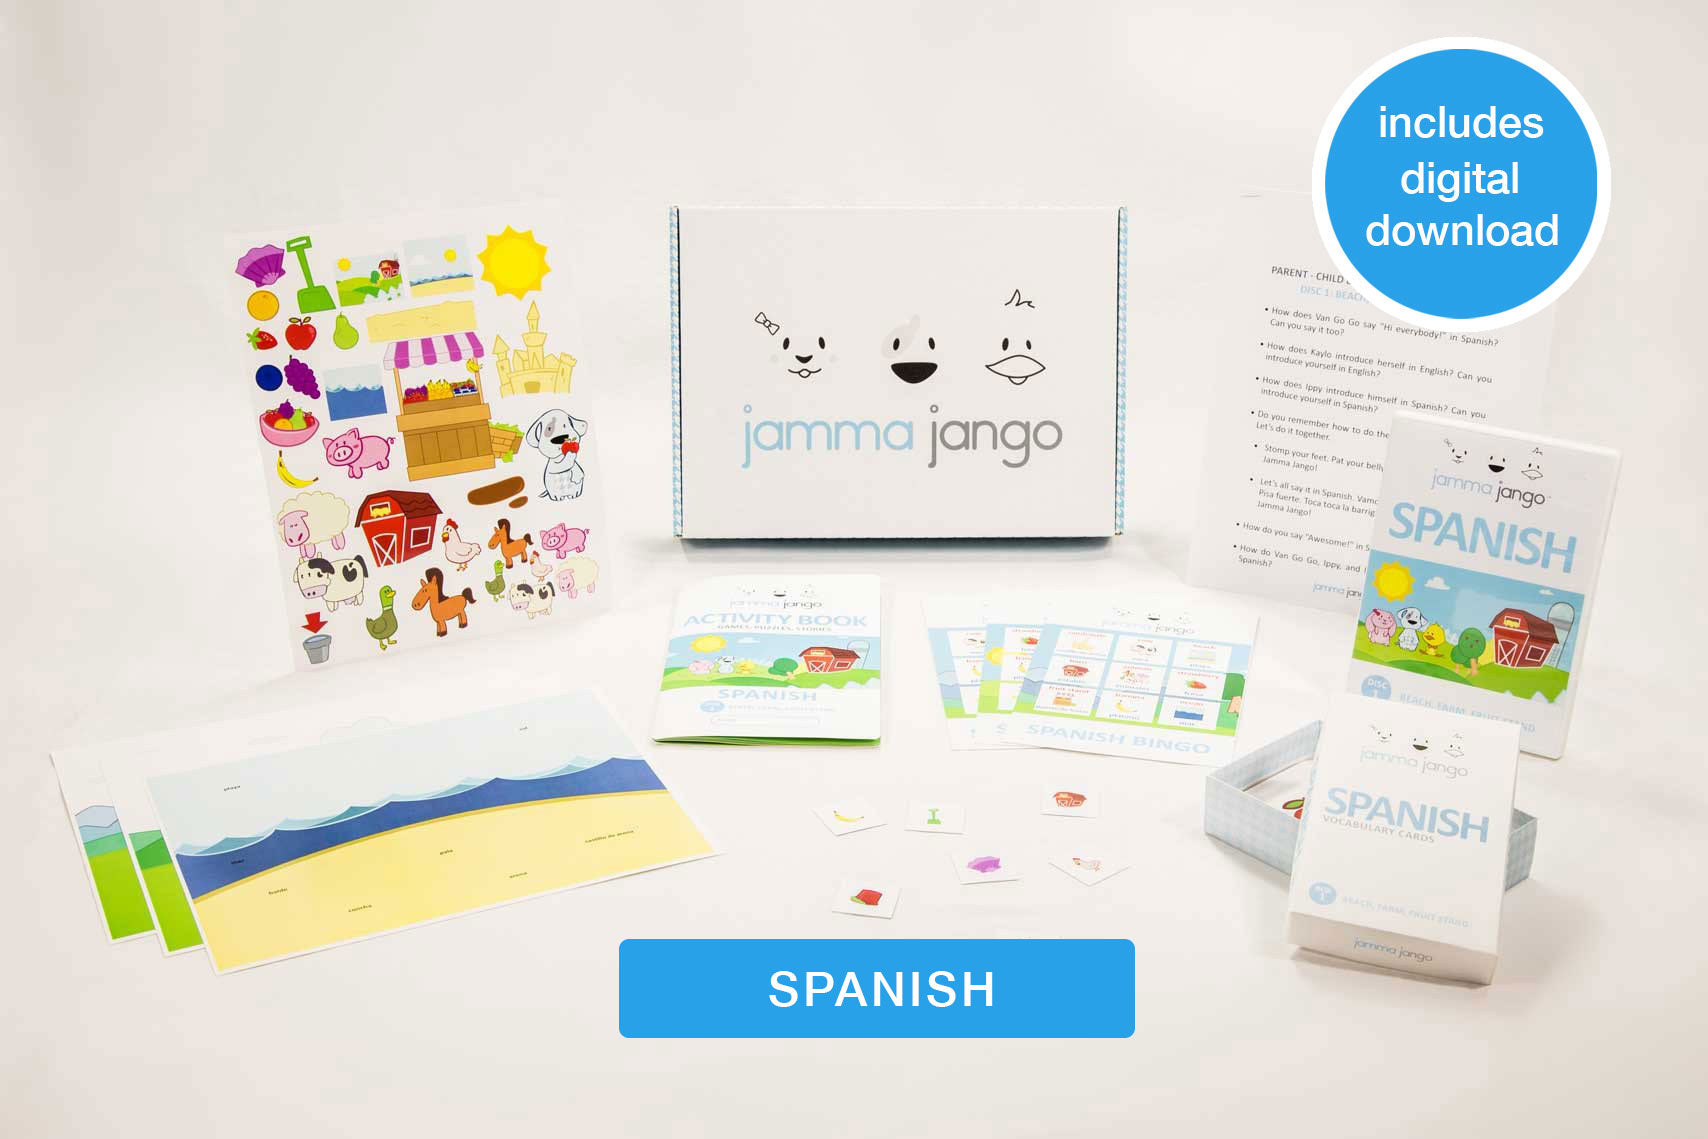 Photo showing the materials and digital download included in Jamma Jango's kit to help teach kids Spanish.